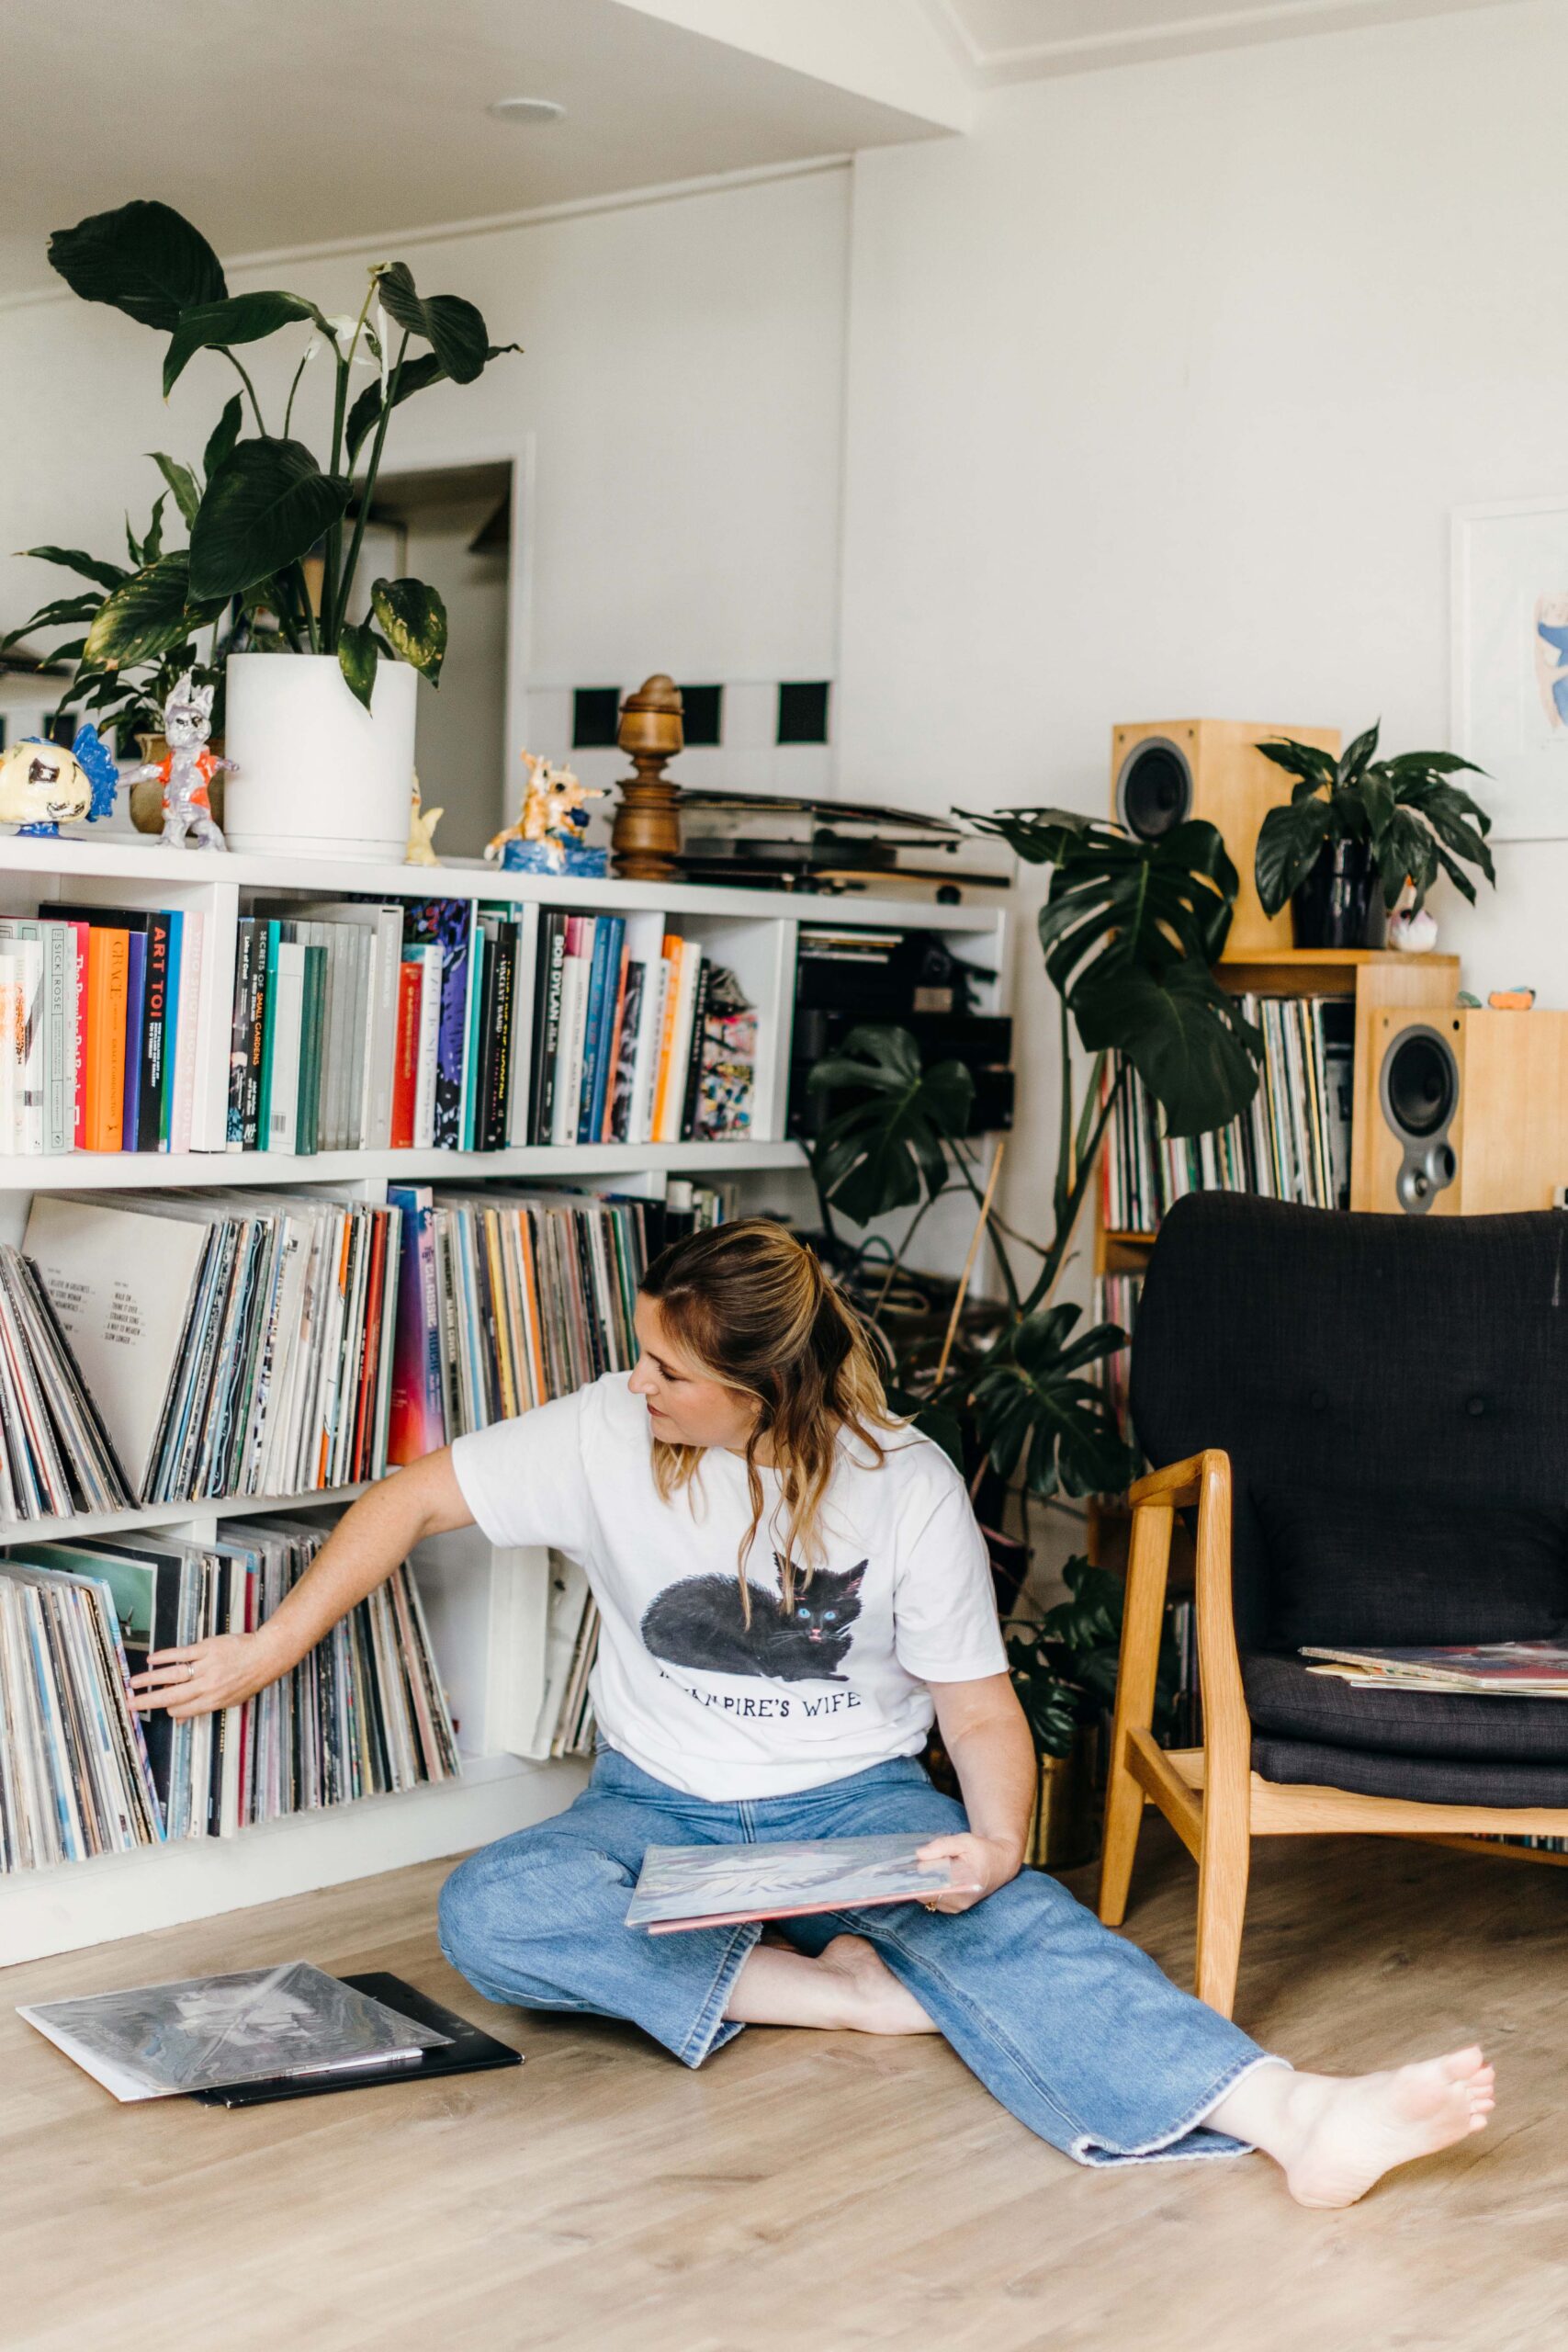 Charlotte Ryan in a t-shirt and jeans sitting on the floor pulling records out of the shelving behind her